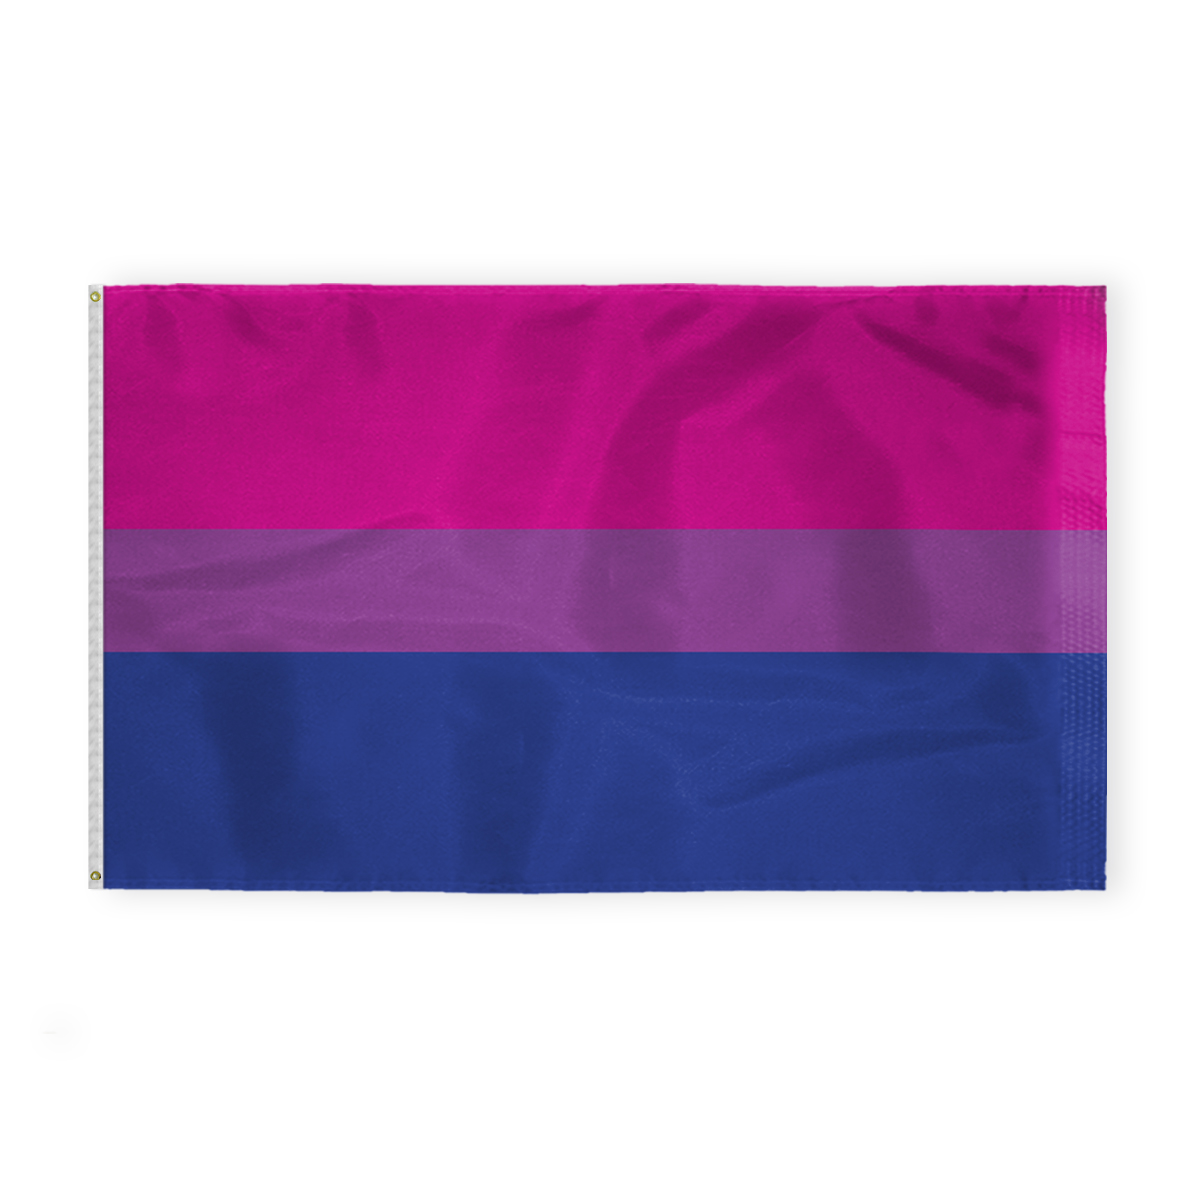 AGAS Large Bi Pride Flag 6x10 Ft - Double Sided Printed 200D Nylon